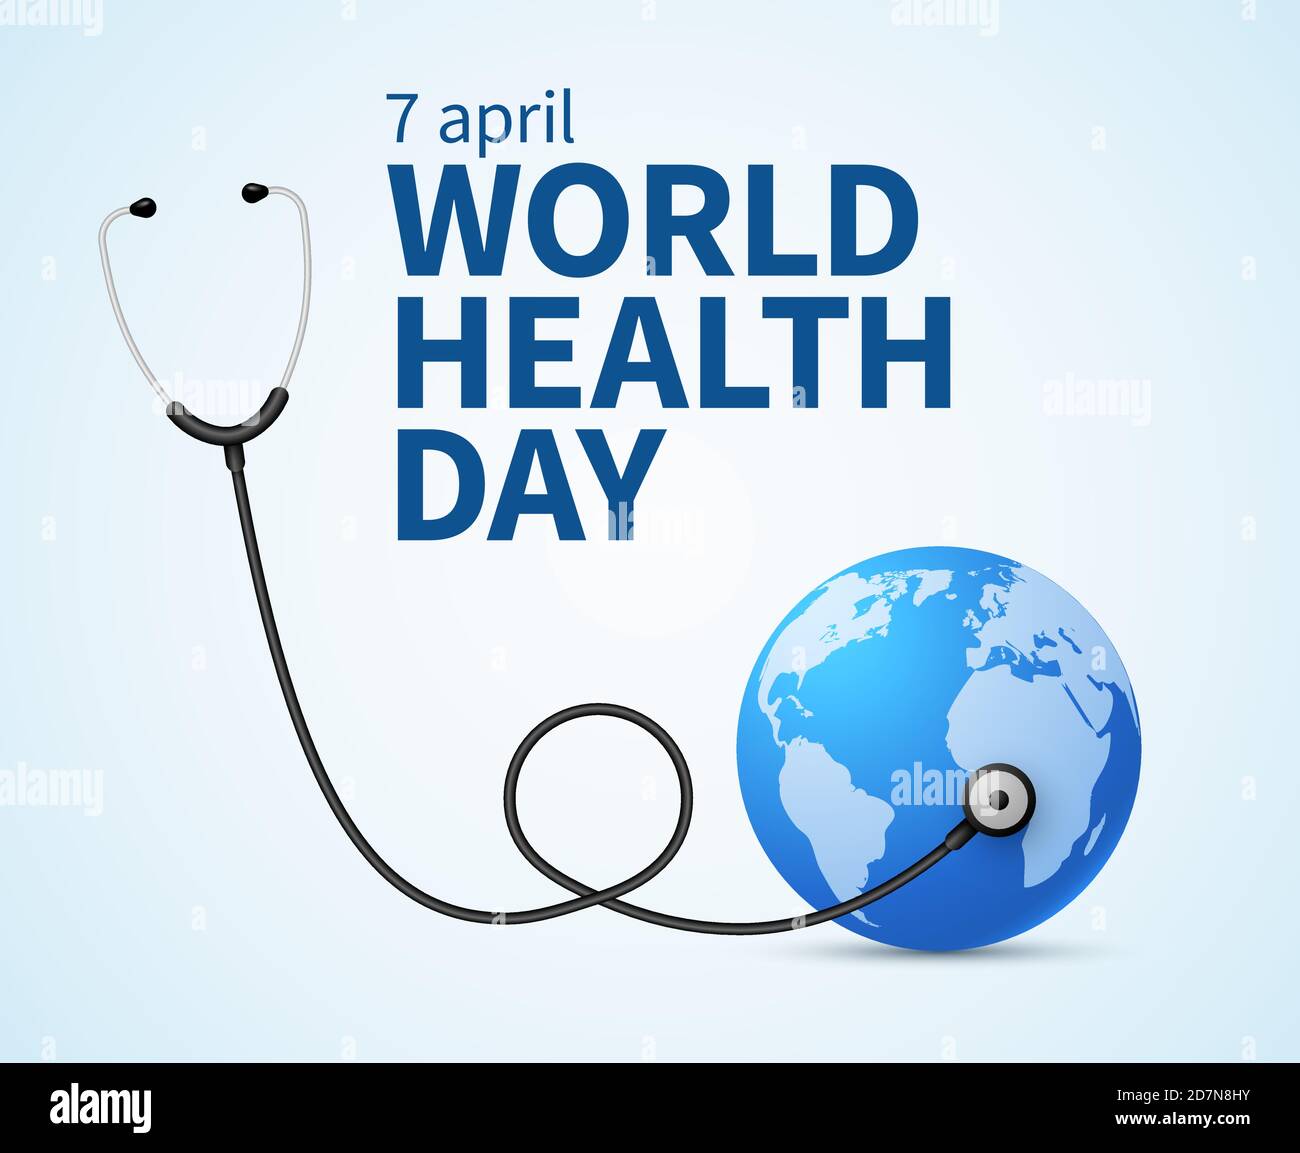 Health day. Wellness, health protection and global medicine healthcare vector poster. Illustration of world health day, international event Stock Vector